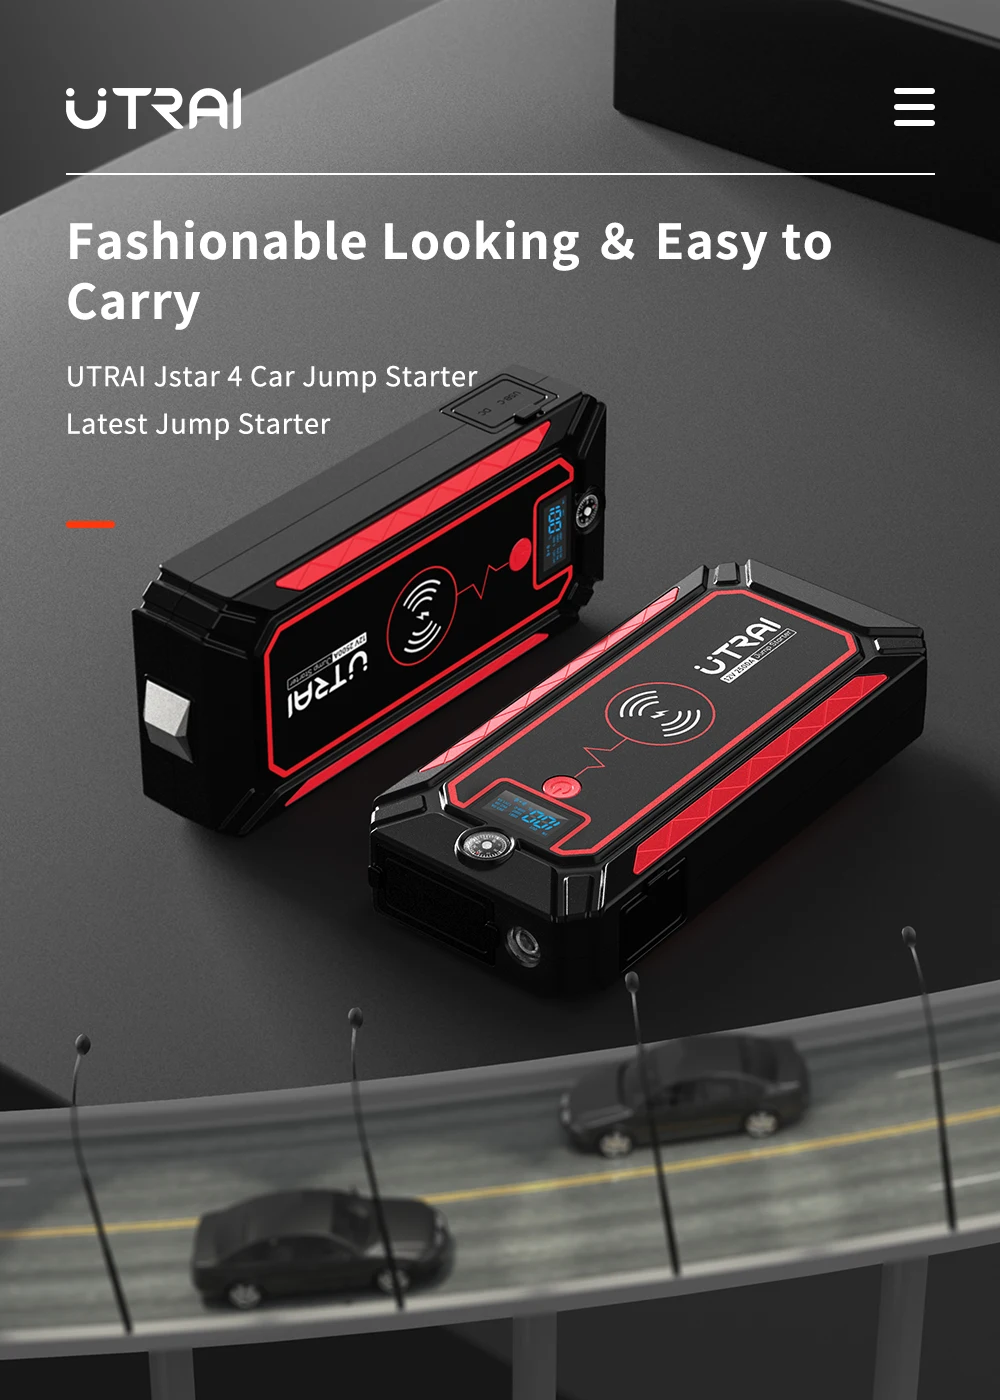 noco boost plus gb40 UTRAI Car Jump Starter 24000mAh 2500A Power Bank 12V Car Battery with 10W Wireless Charger LCD Screen Starting Device noco boost plus